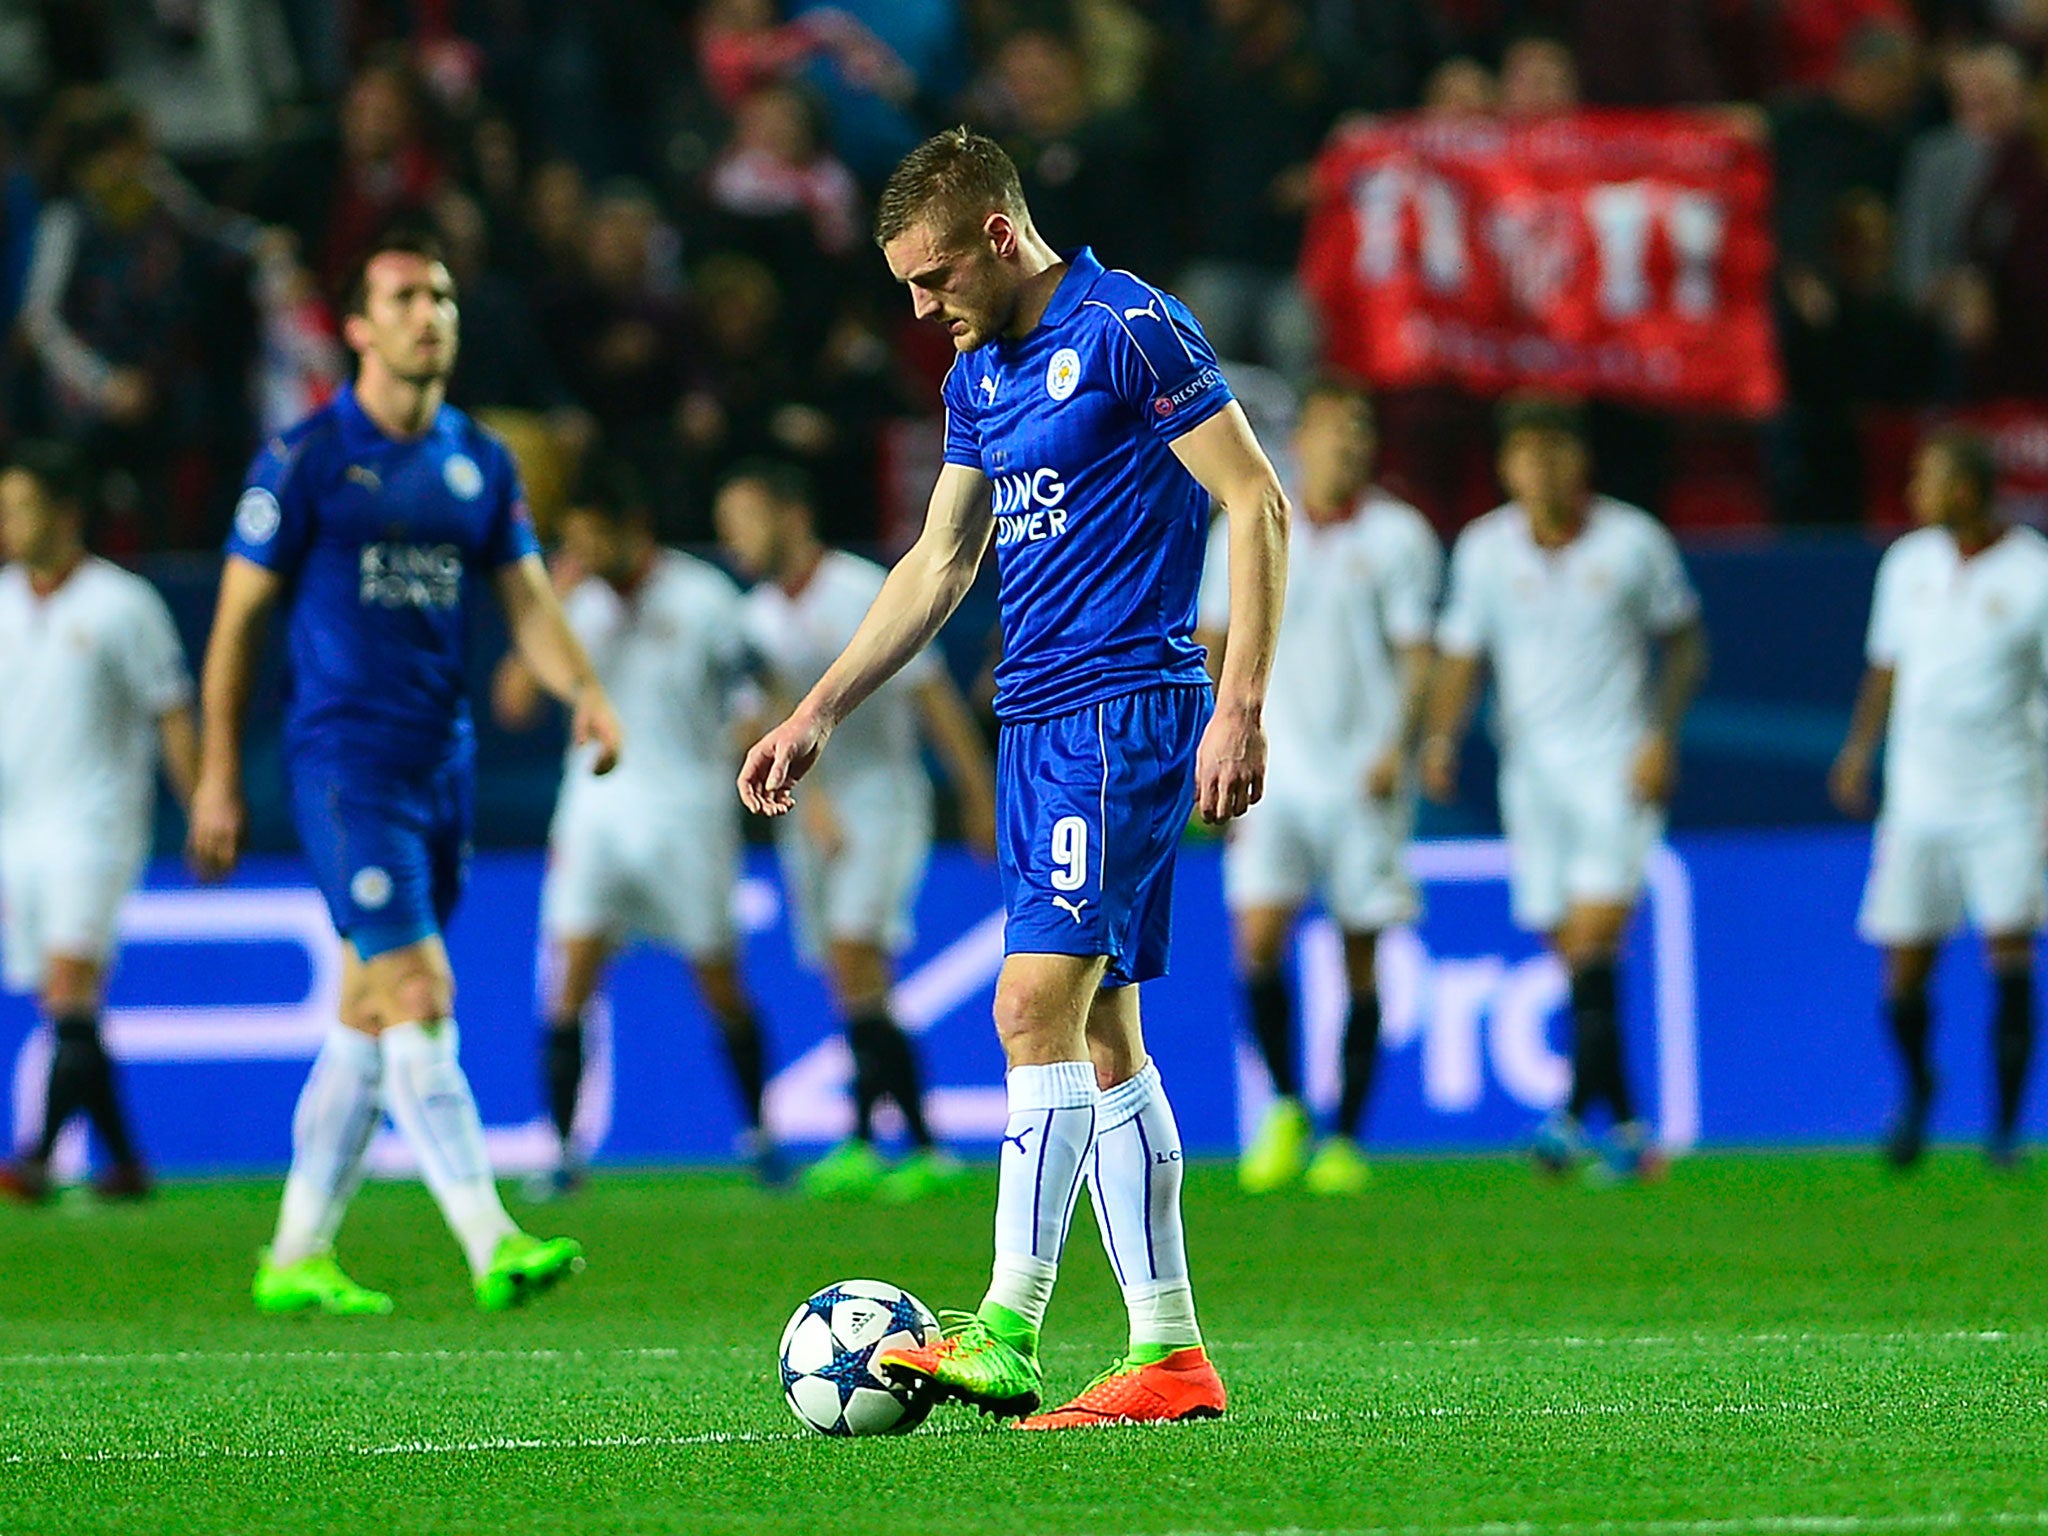 Vardy's away goal handed Leicester hope but the Foxes should expect a fierce response from their Spanish opponents in the return fixture